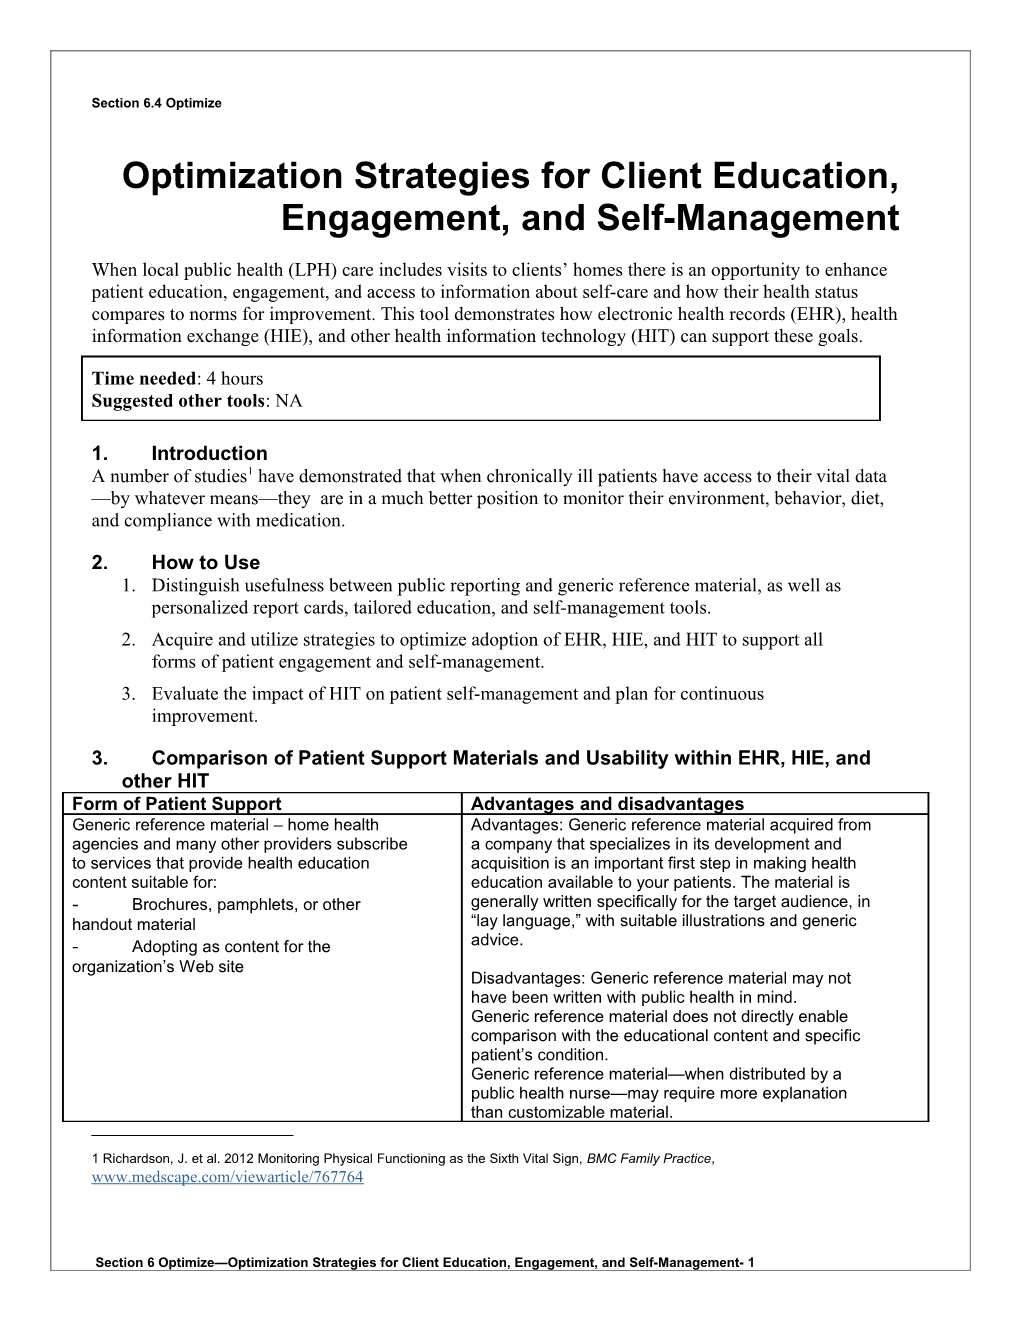 6 Optimization Strategies for Client Education, Engagement, and Self-Management